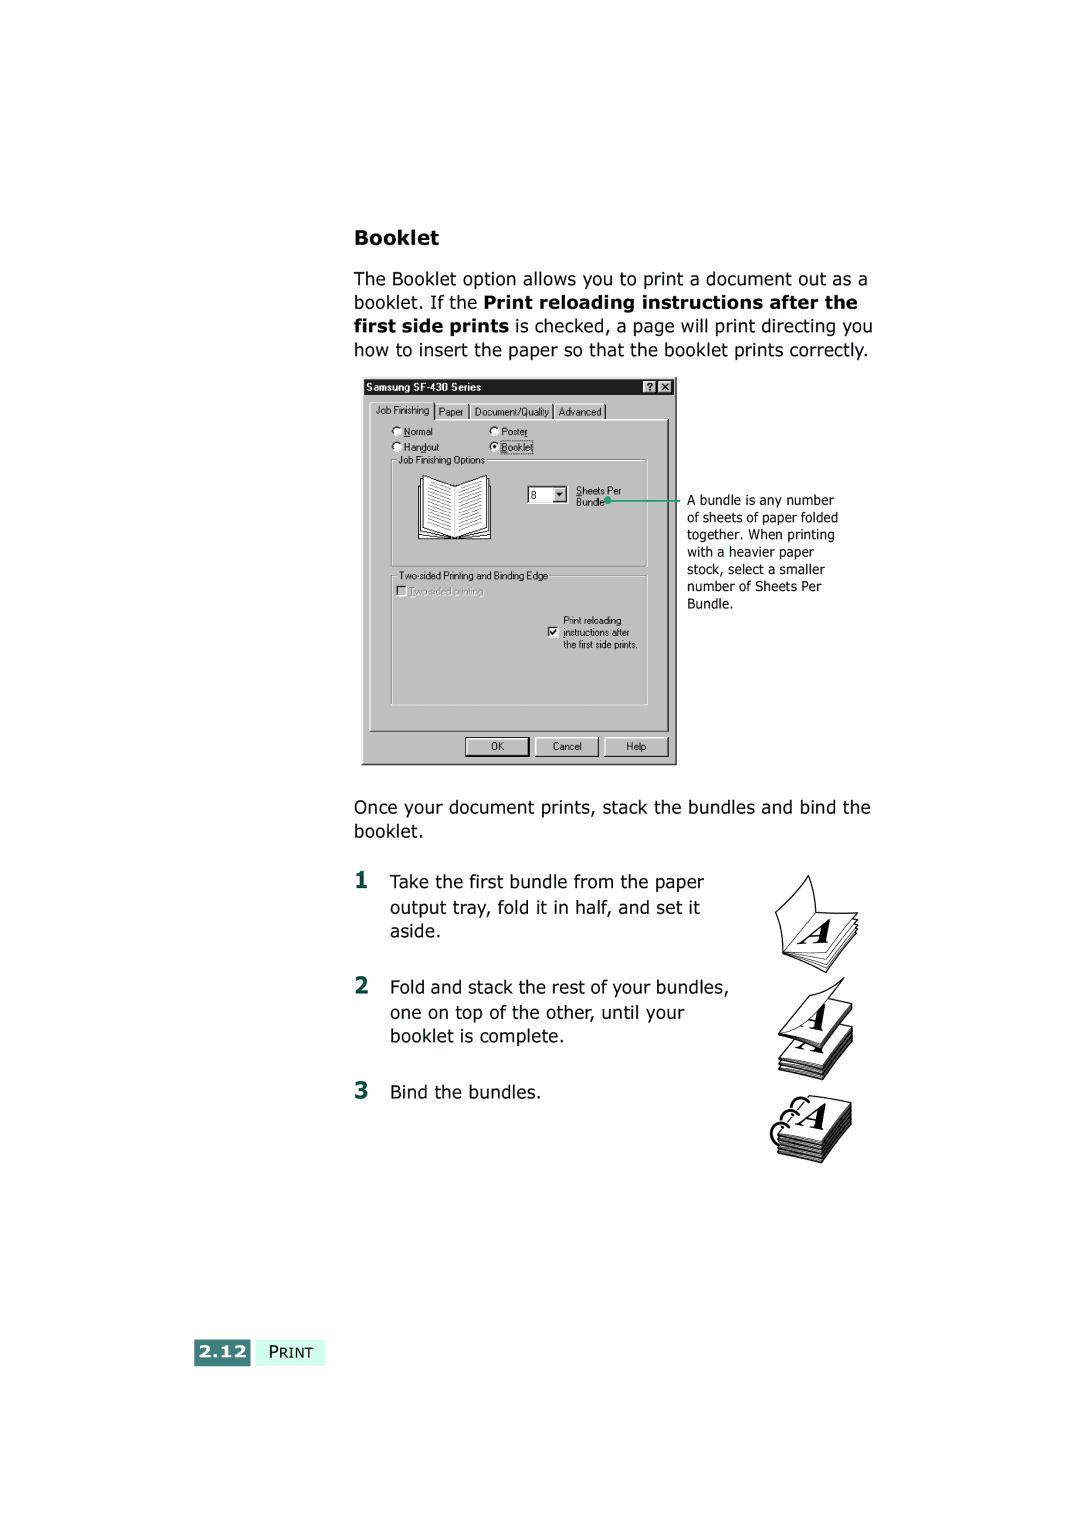 Samsung SF-430 manual Booklet option allows you to print a document out as a 